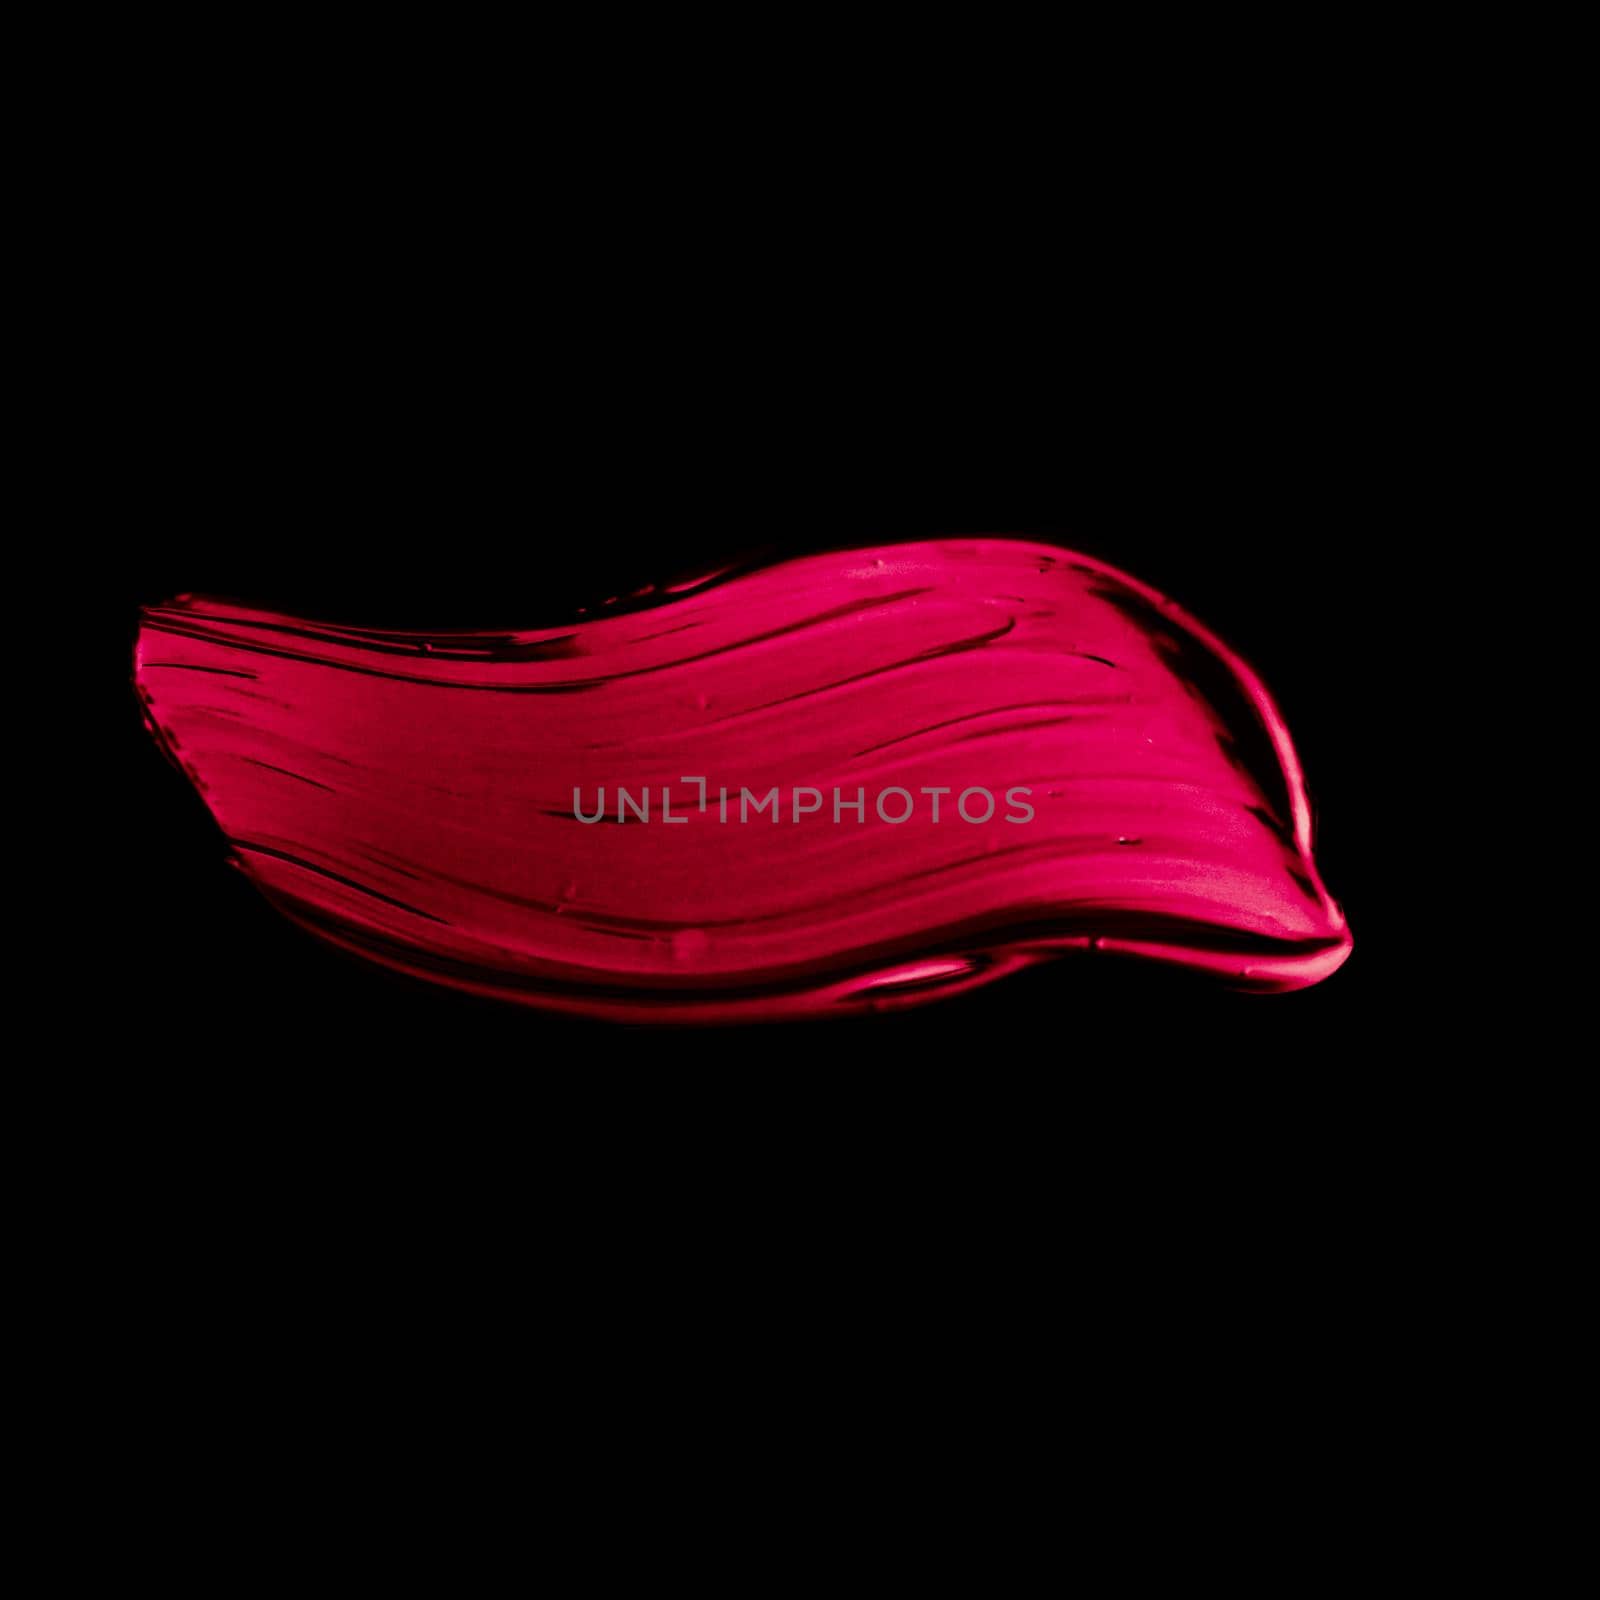 Art abstract, cosmetic product and hand painted design concept - Pink lipstick brush stroke texture isolated on black background